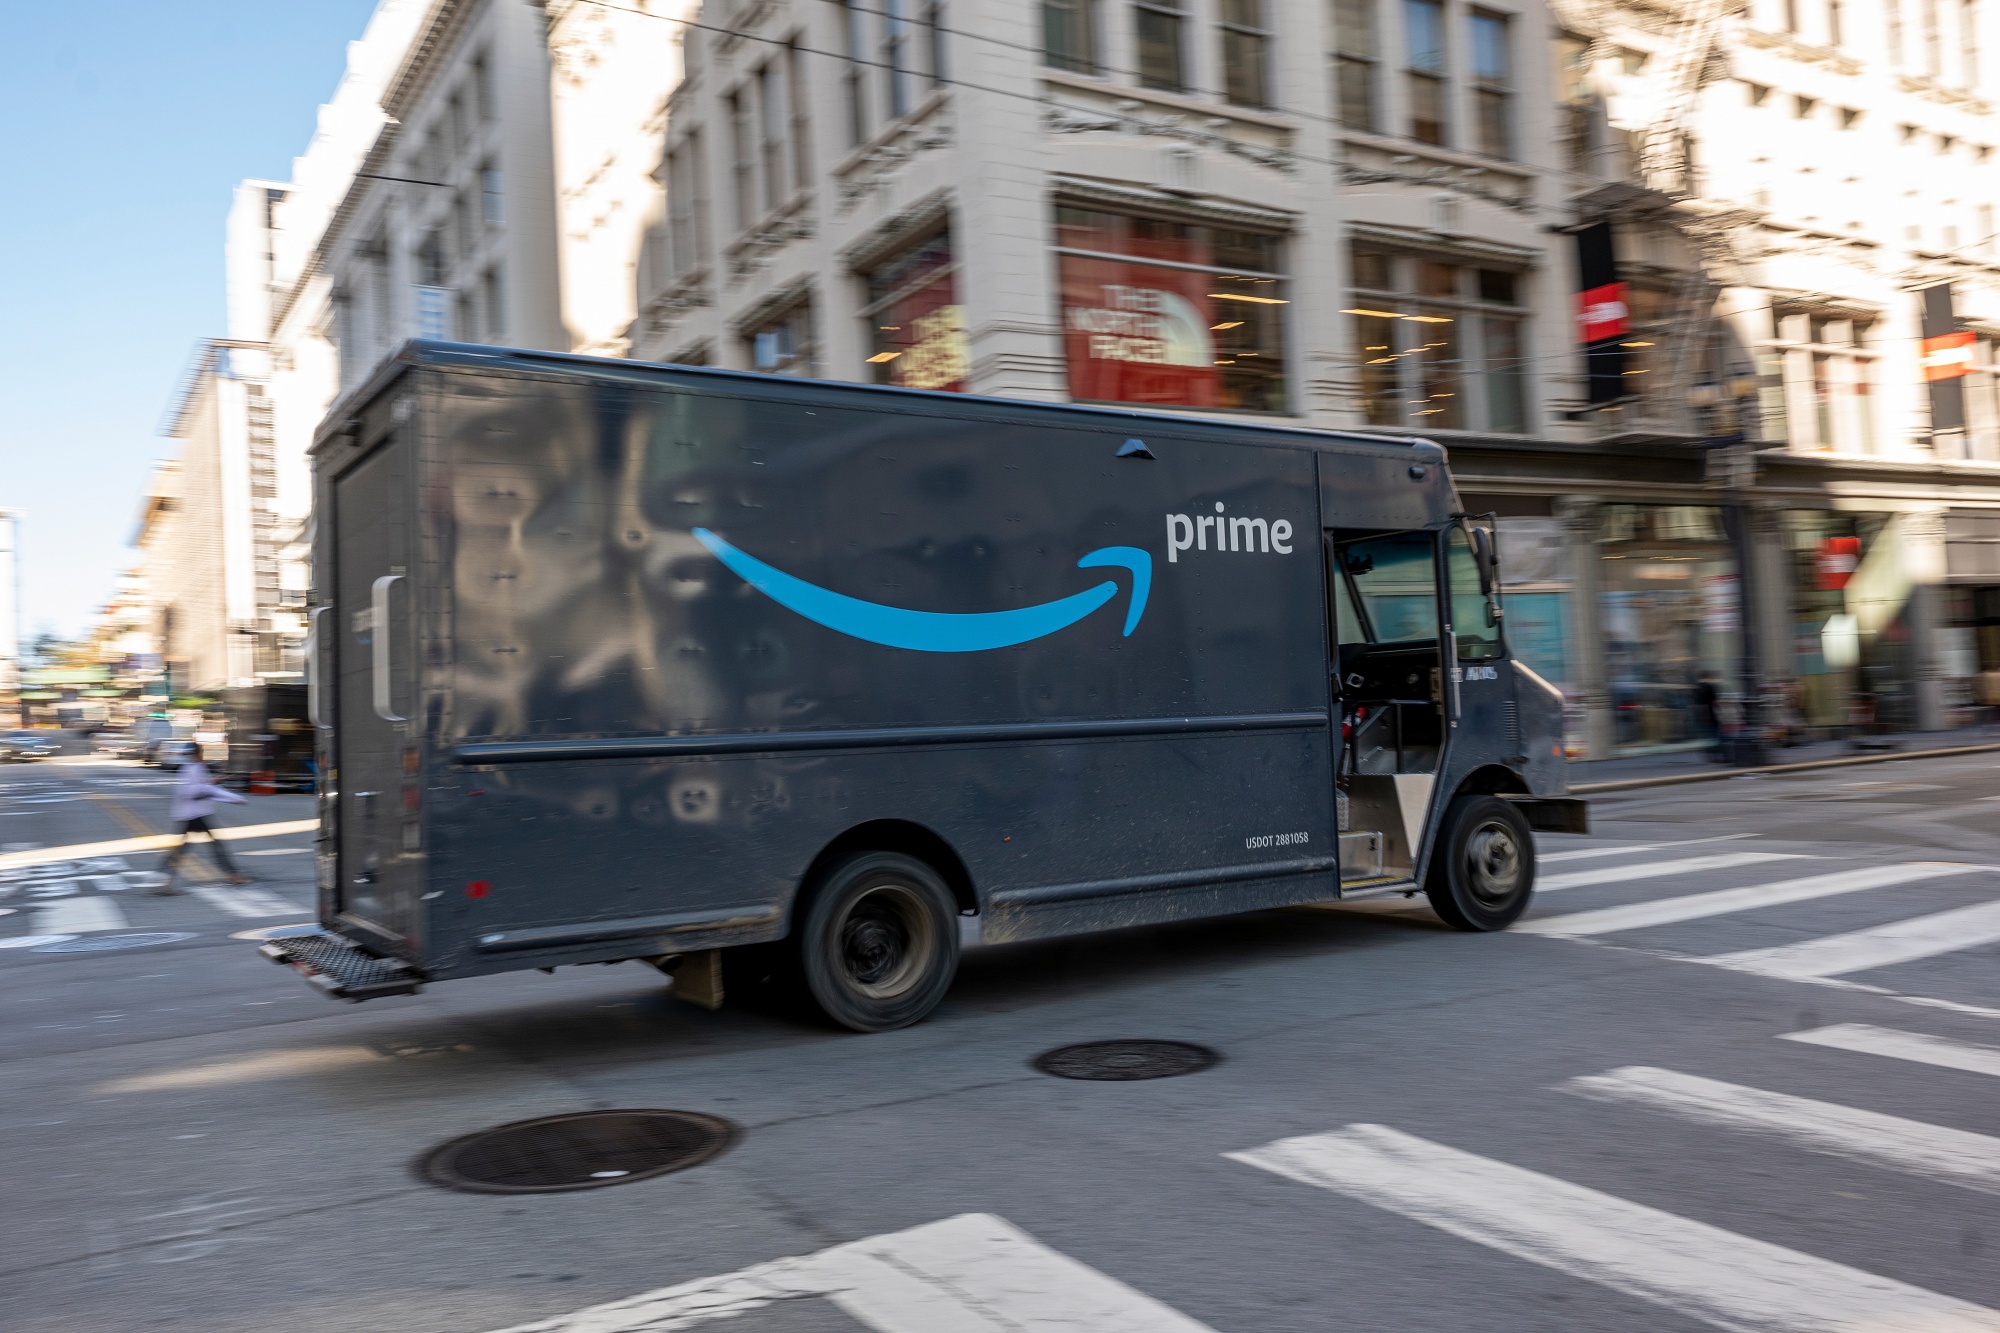 Doubles Down on Delivery Speed Ahead of Earnings (AMZN) - Bloomberg